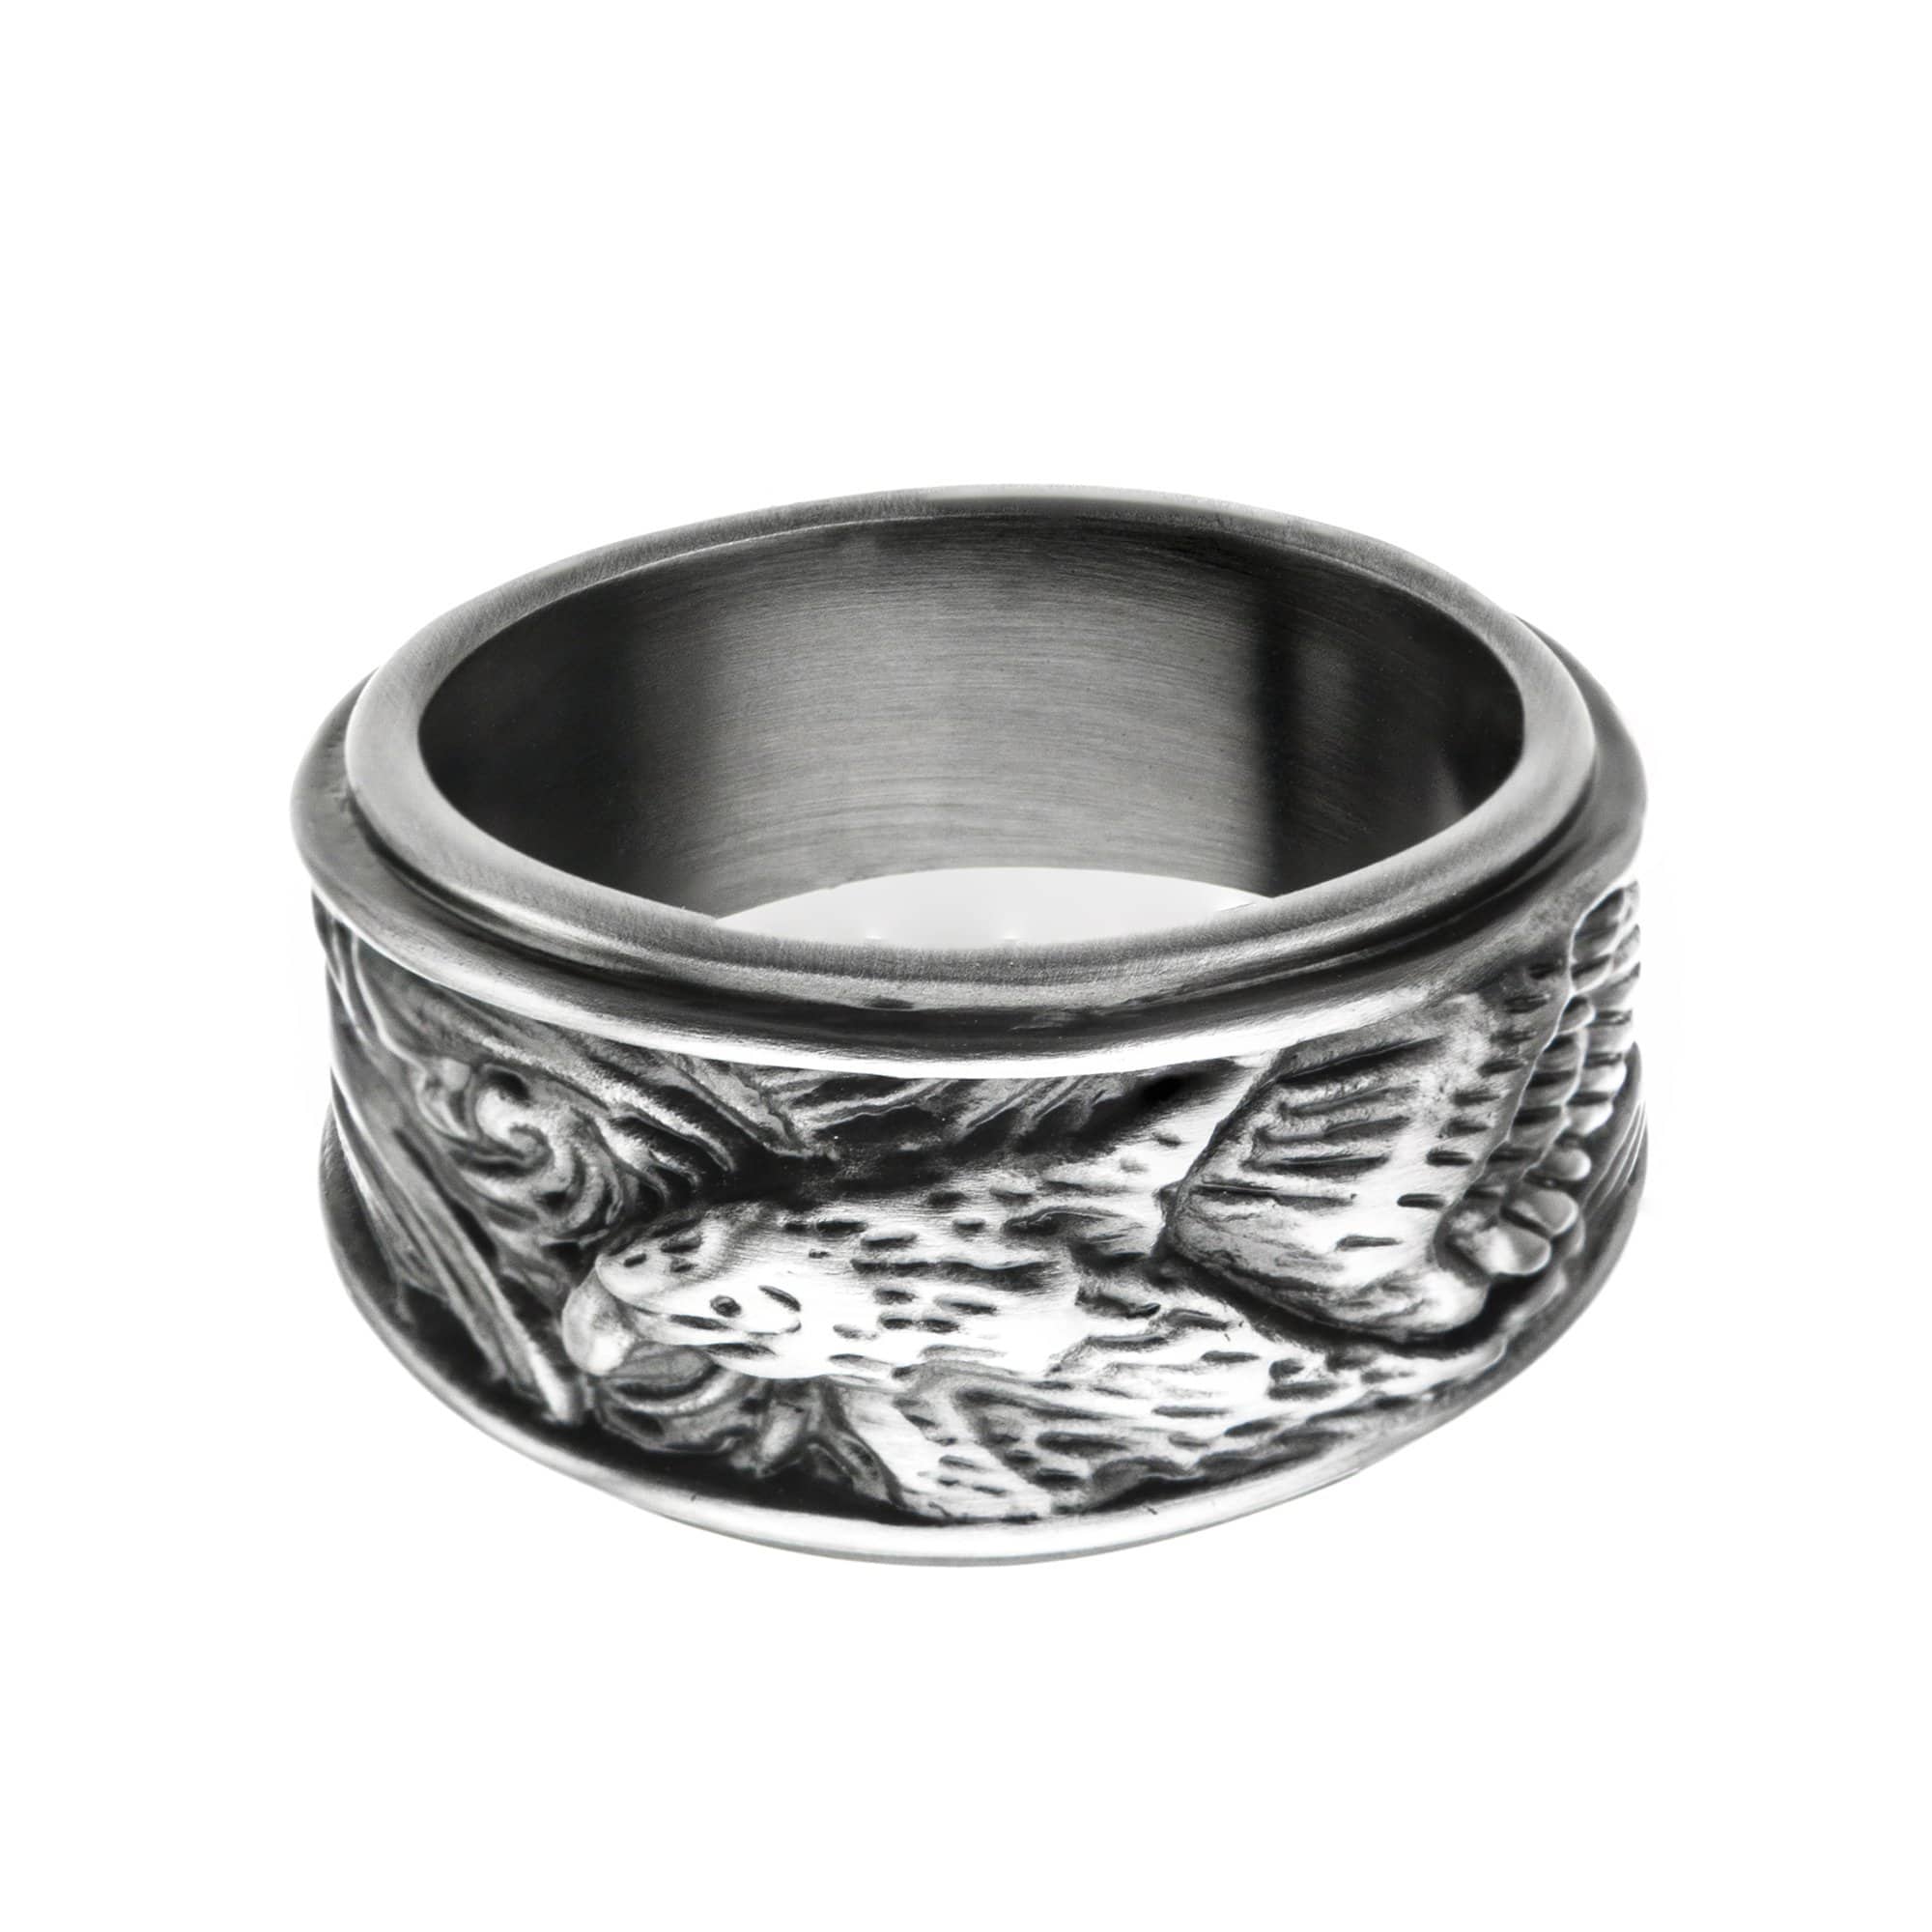 INOX JEWELRY Rings Silver Tone Stainless Steel Oxidized Finish Brushed Eagle Band Ring